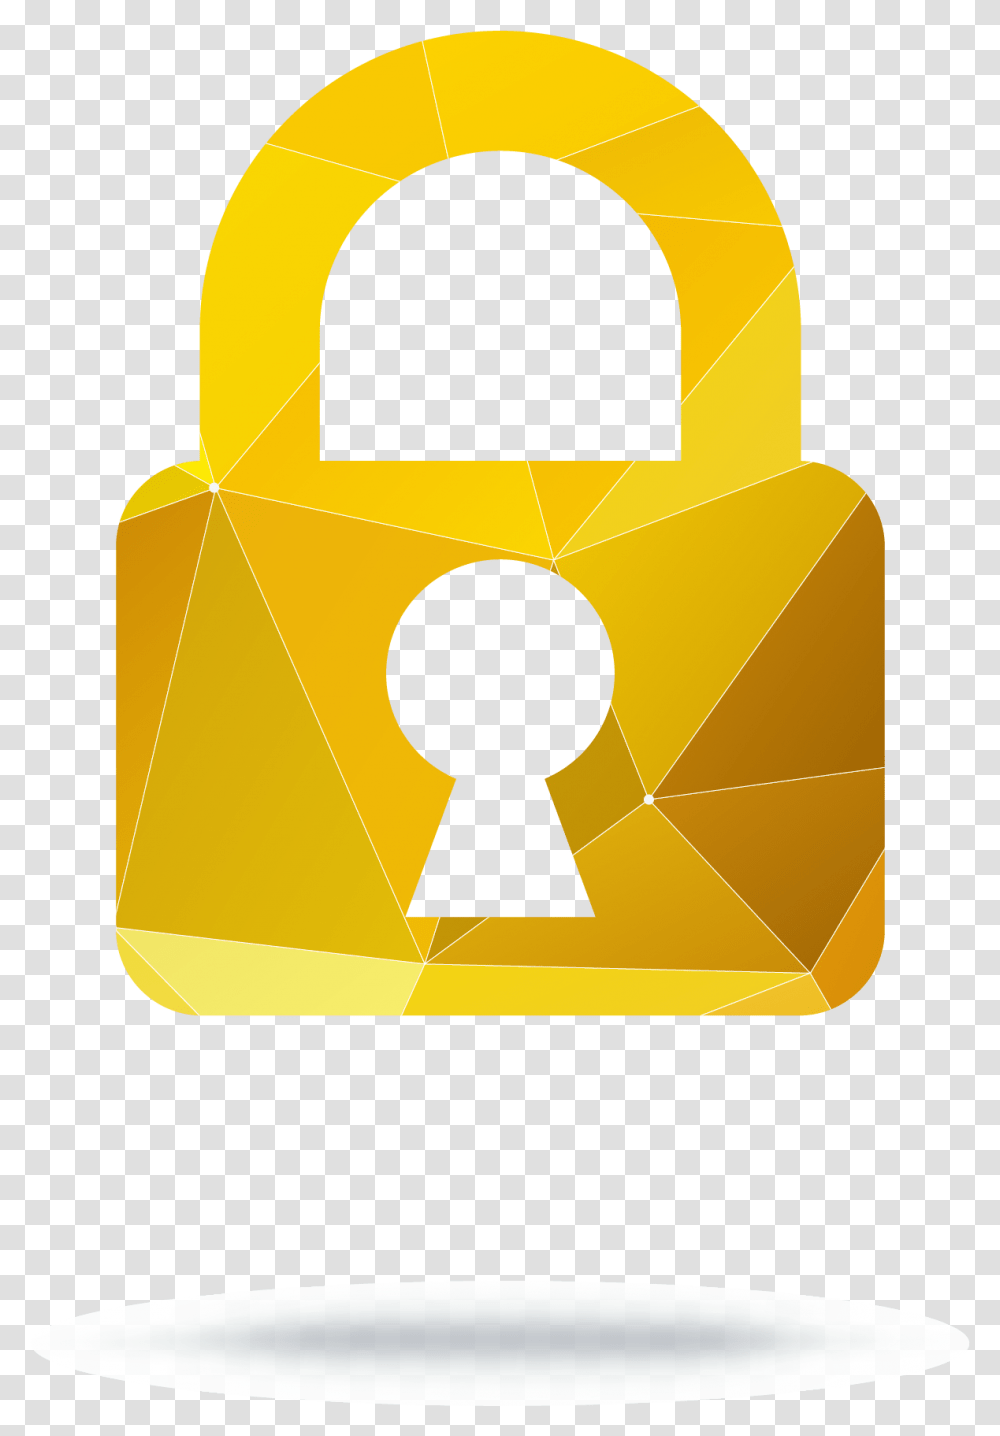 Cybersecurity For The Self Driving Vehicle Wiley, Lock Transparent Png